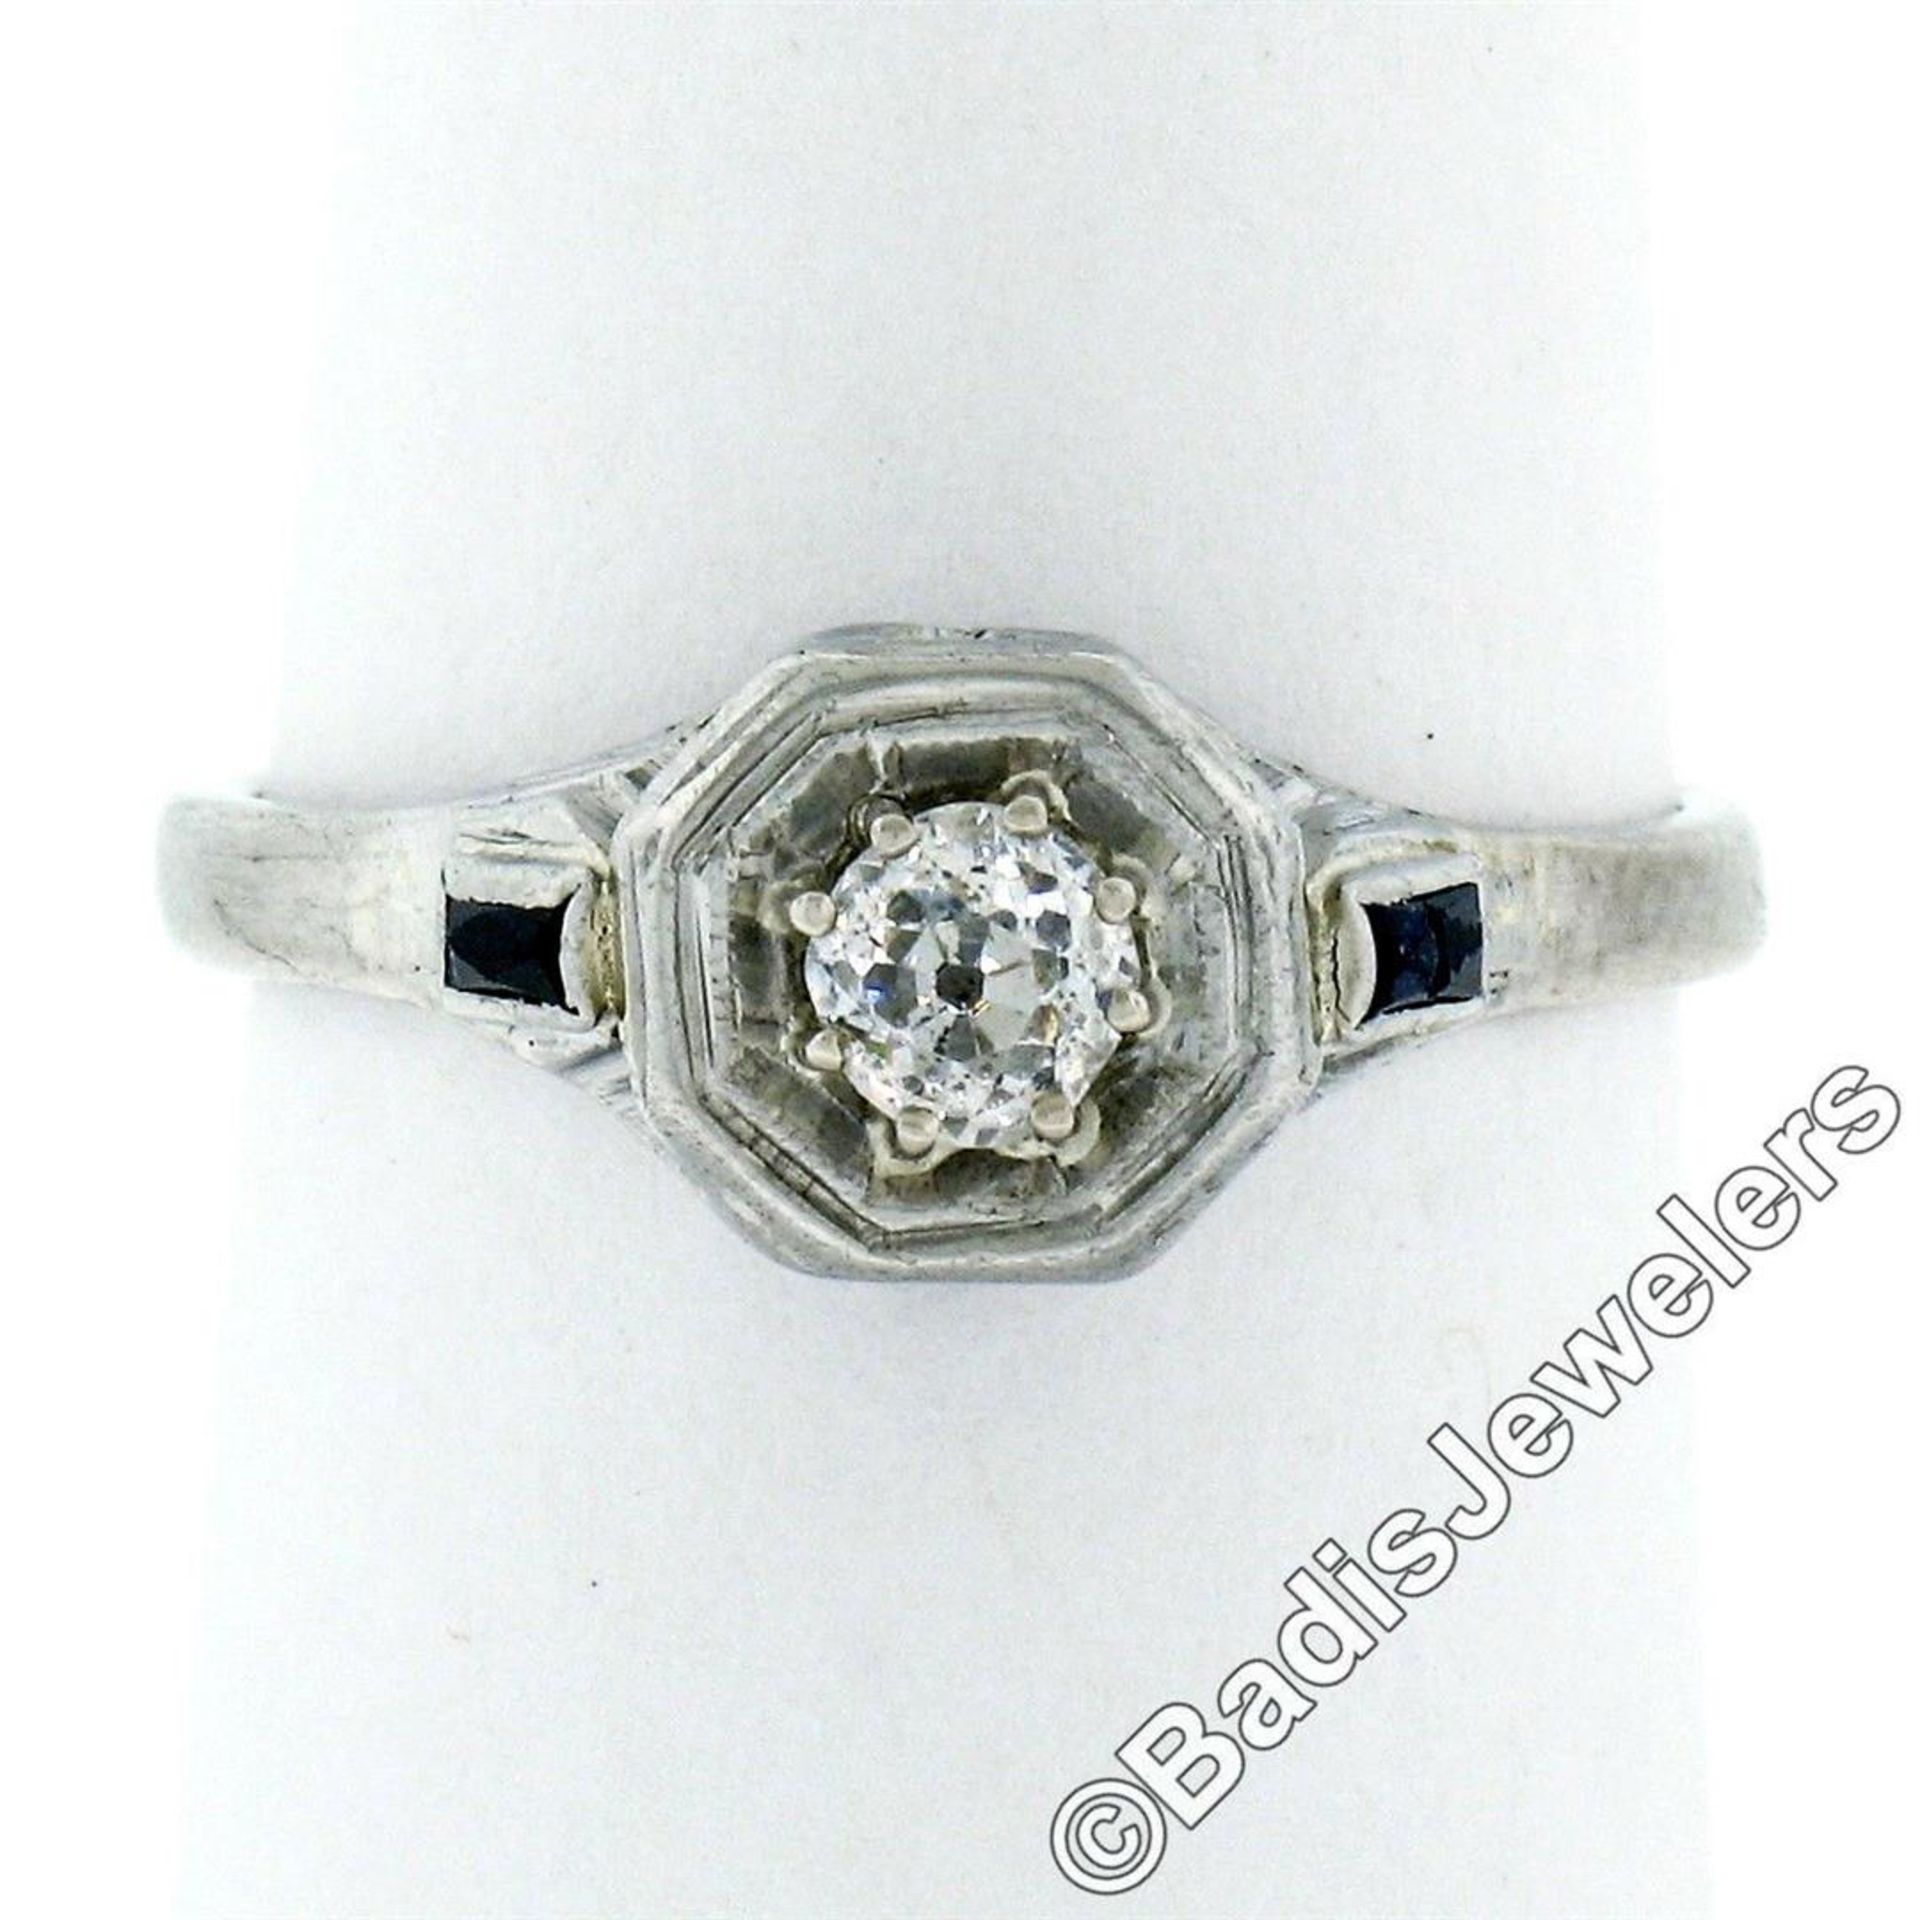 Art Deco 14kt White Gold 0.28 ctw Diamond Solitaire Engagement Ring - Image 4 of 7